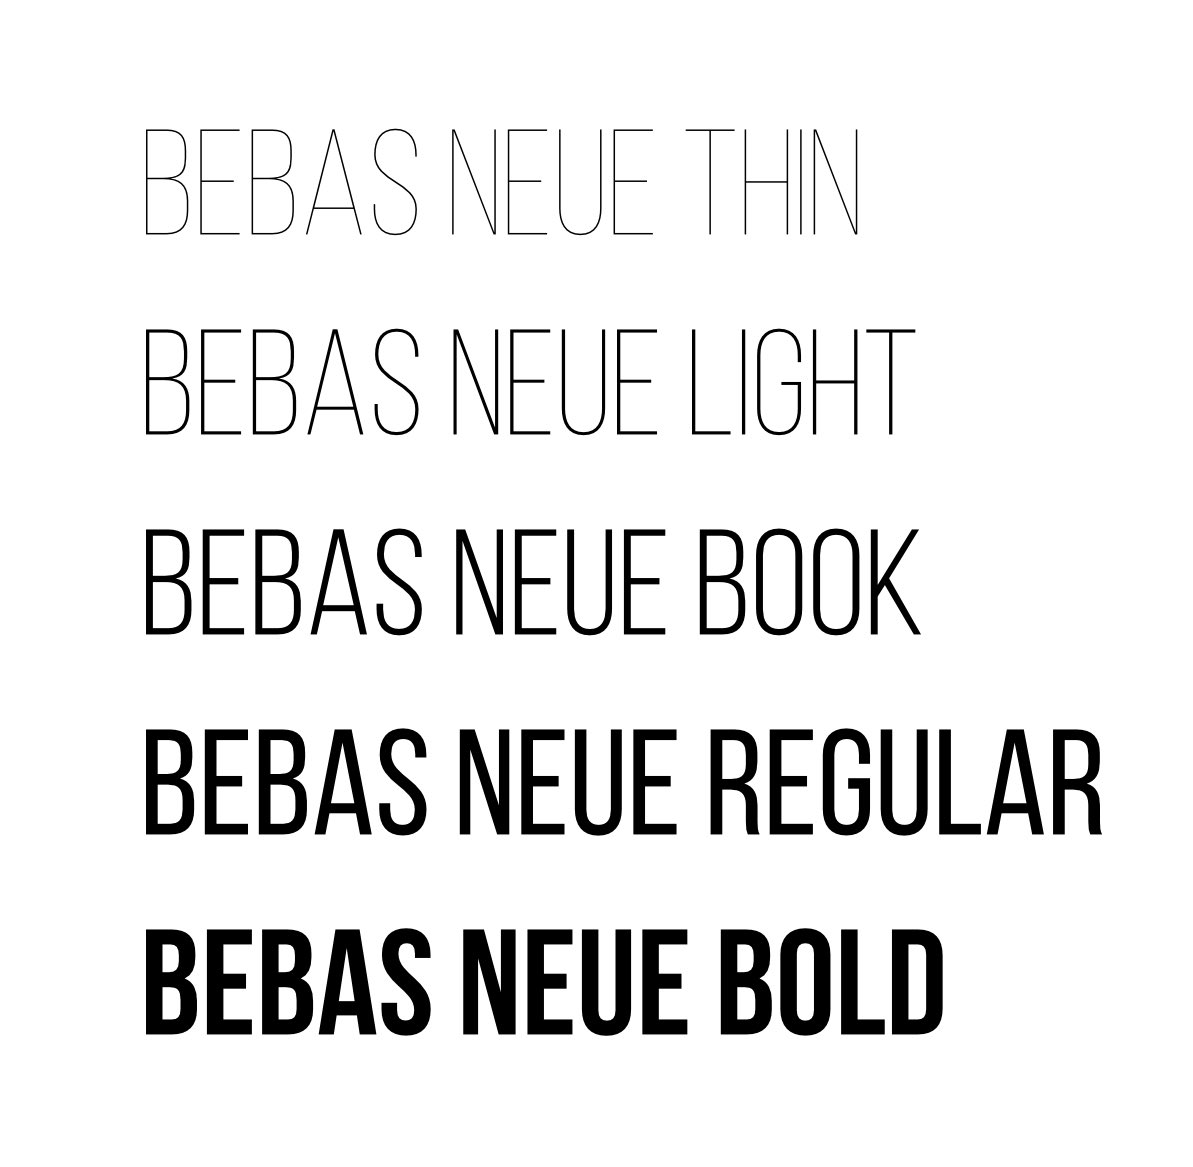 finally, Bebas Neue: amateur, only looks kinda good in some headlines, can’t trust it. incredibly overused.